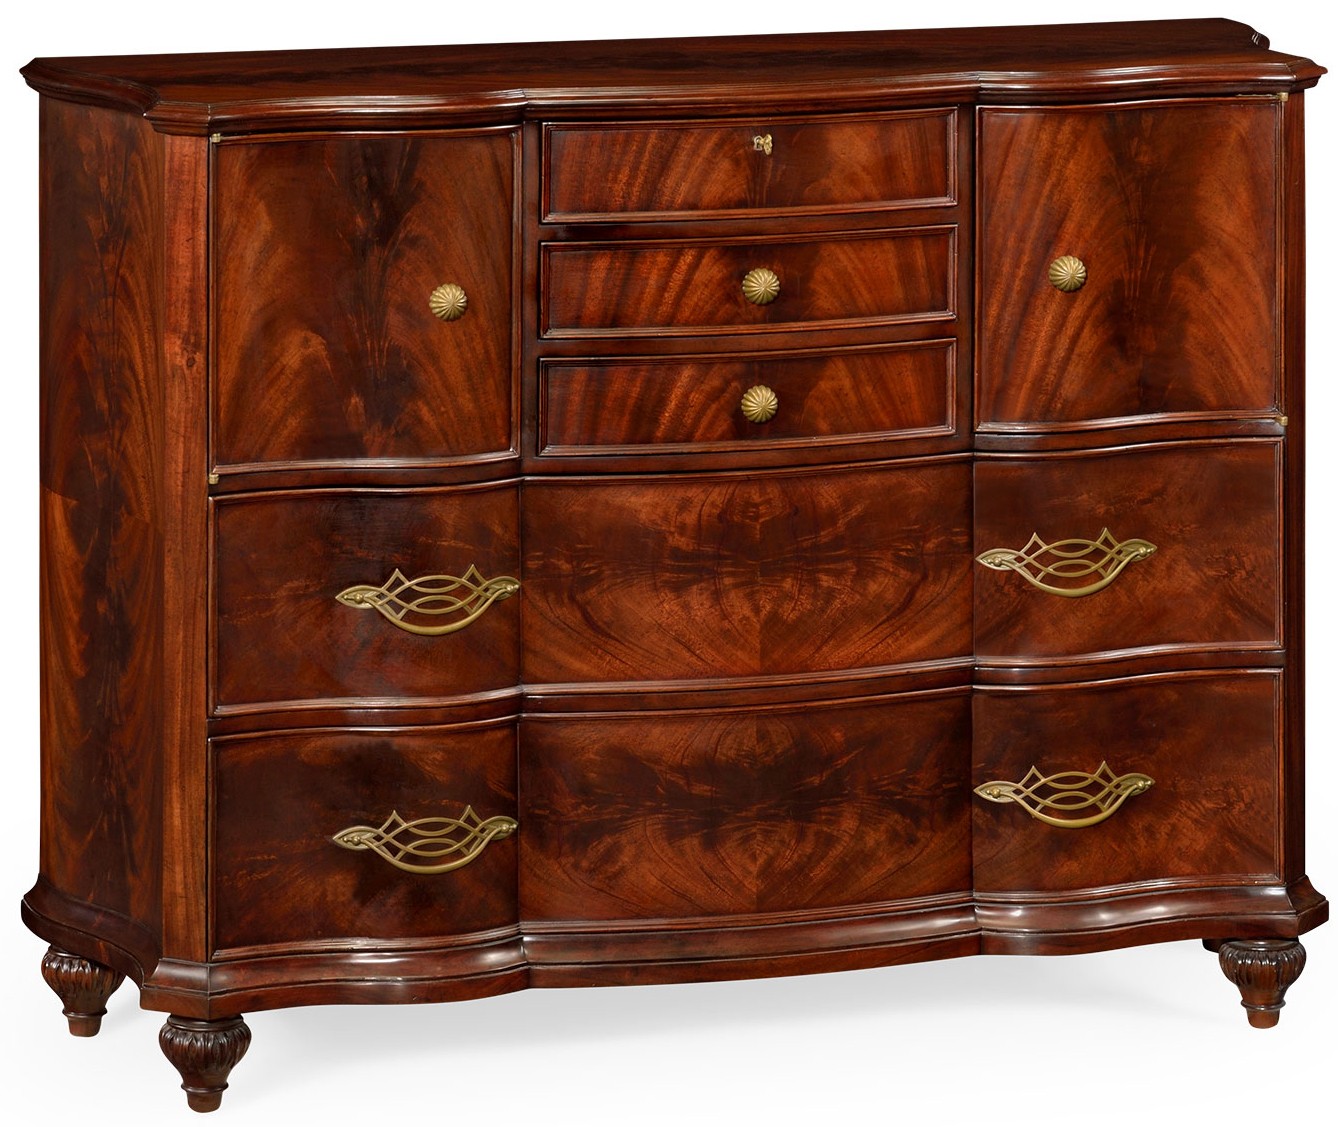 Chest of Drawers Large Persian chest of drawers